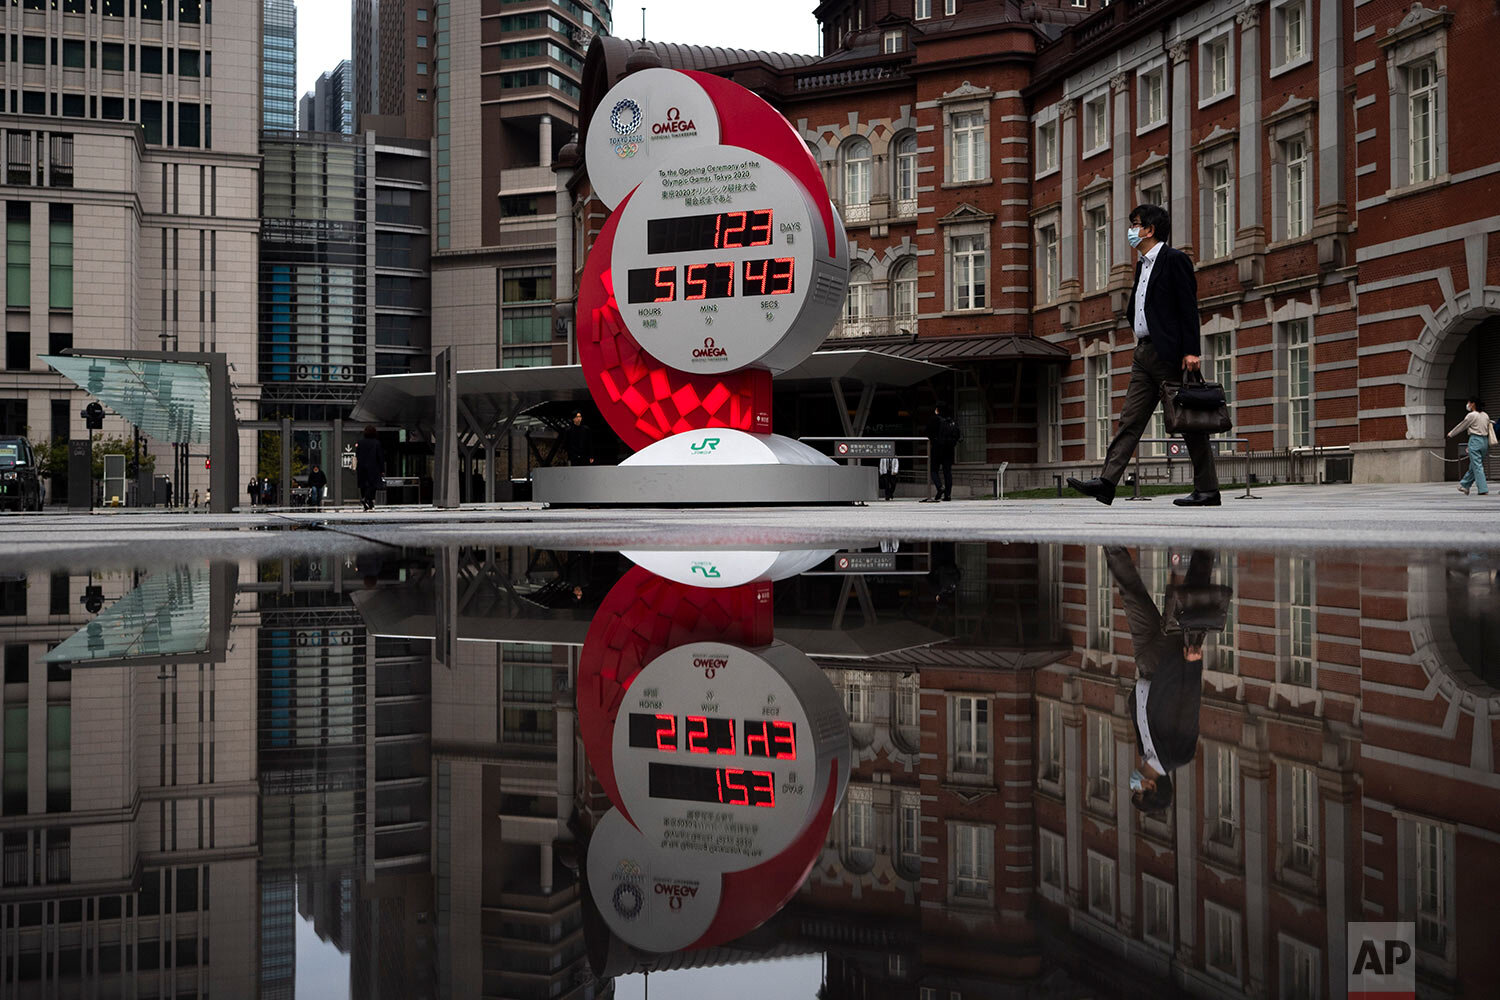  A countdown clock for the Tokyo 2020 Olympics is reflected in a puddle of water outside Tokyo Station in Tokyo, Monday, March 23, 2020. (AP Photo/Jae C. Hong) 